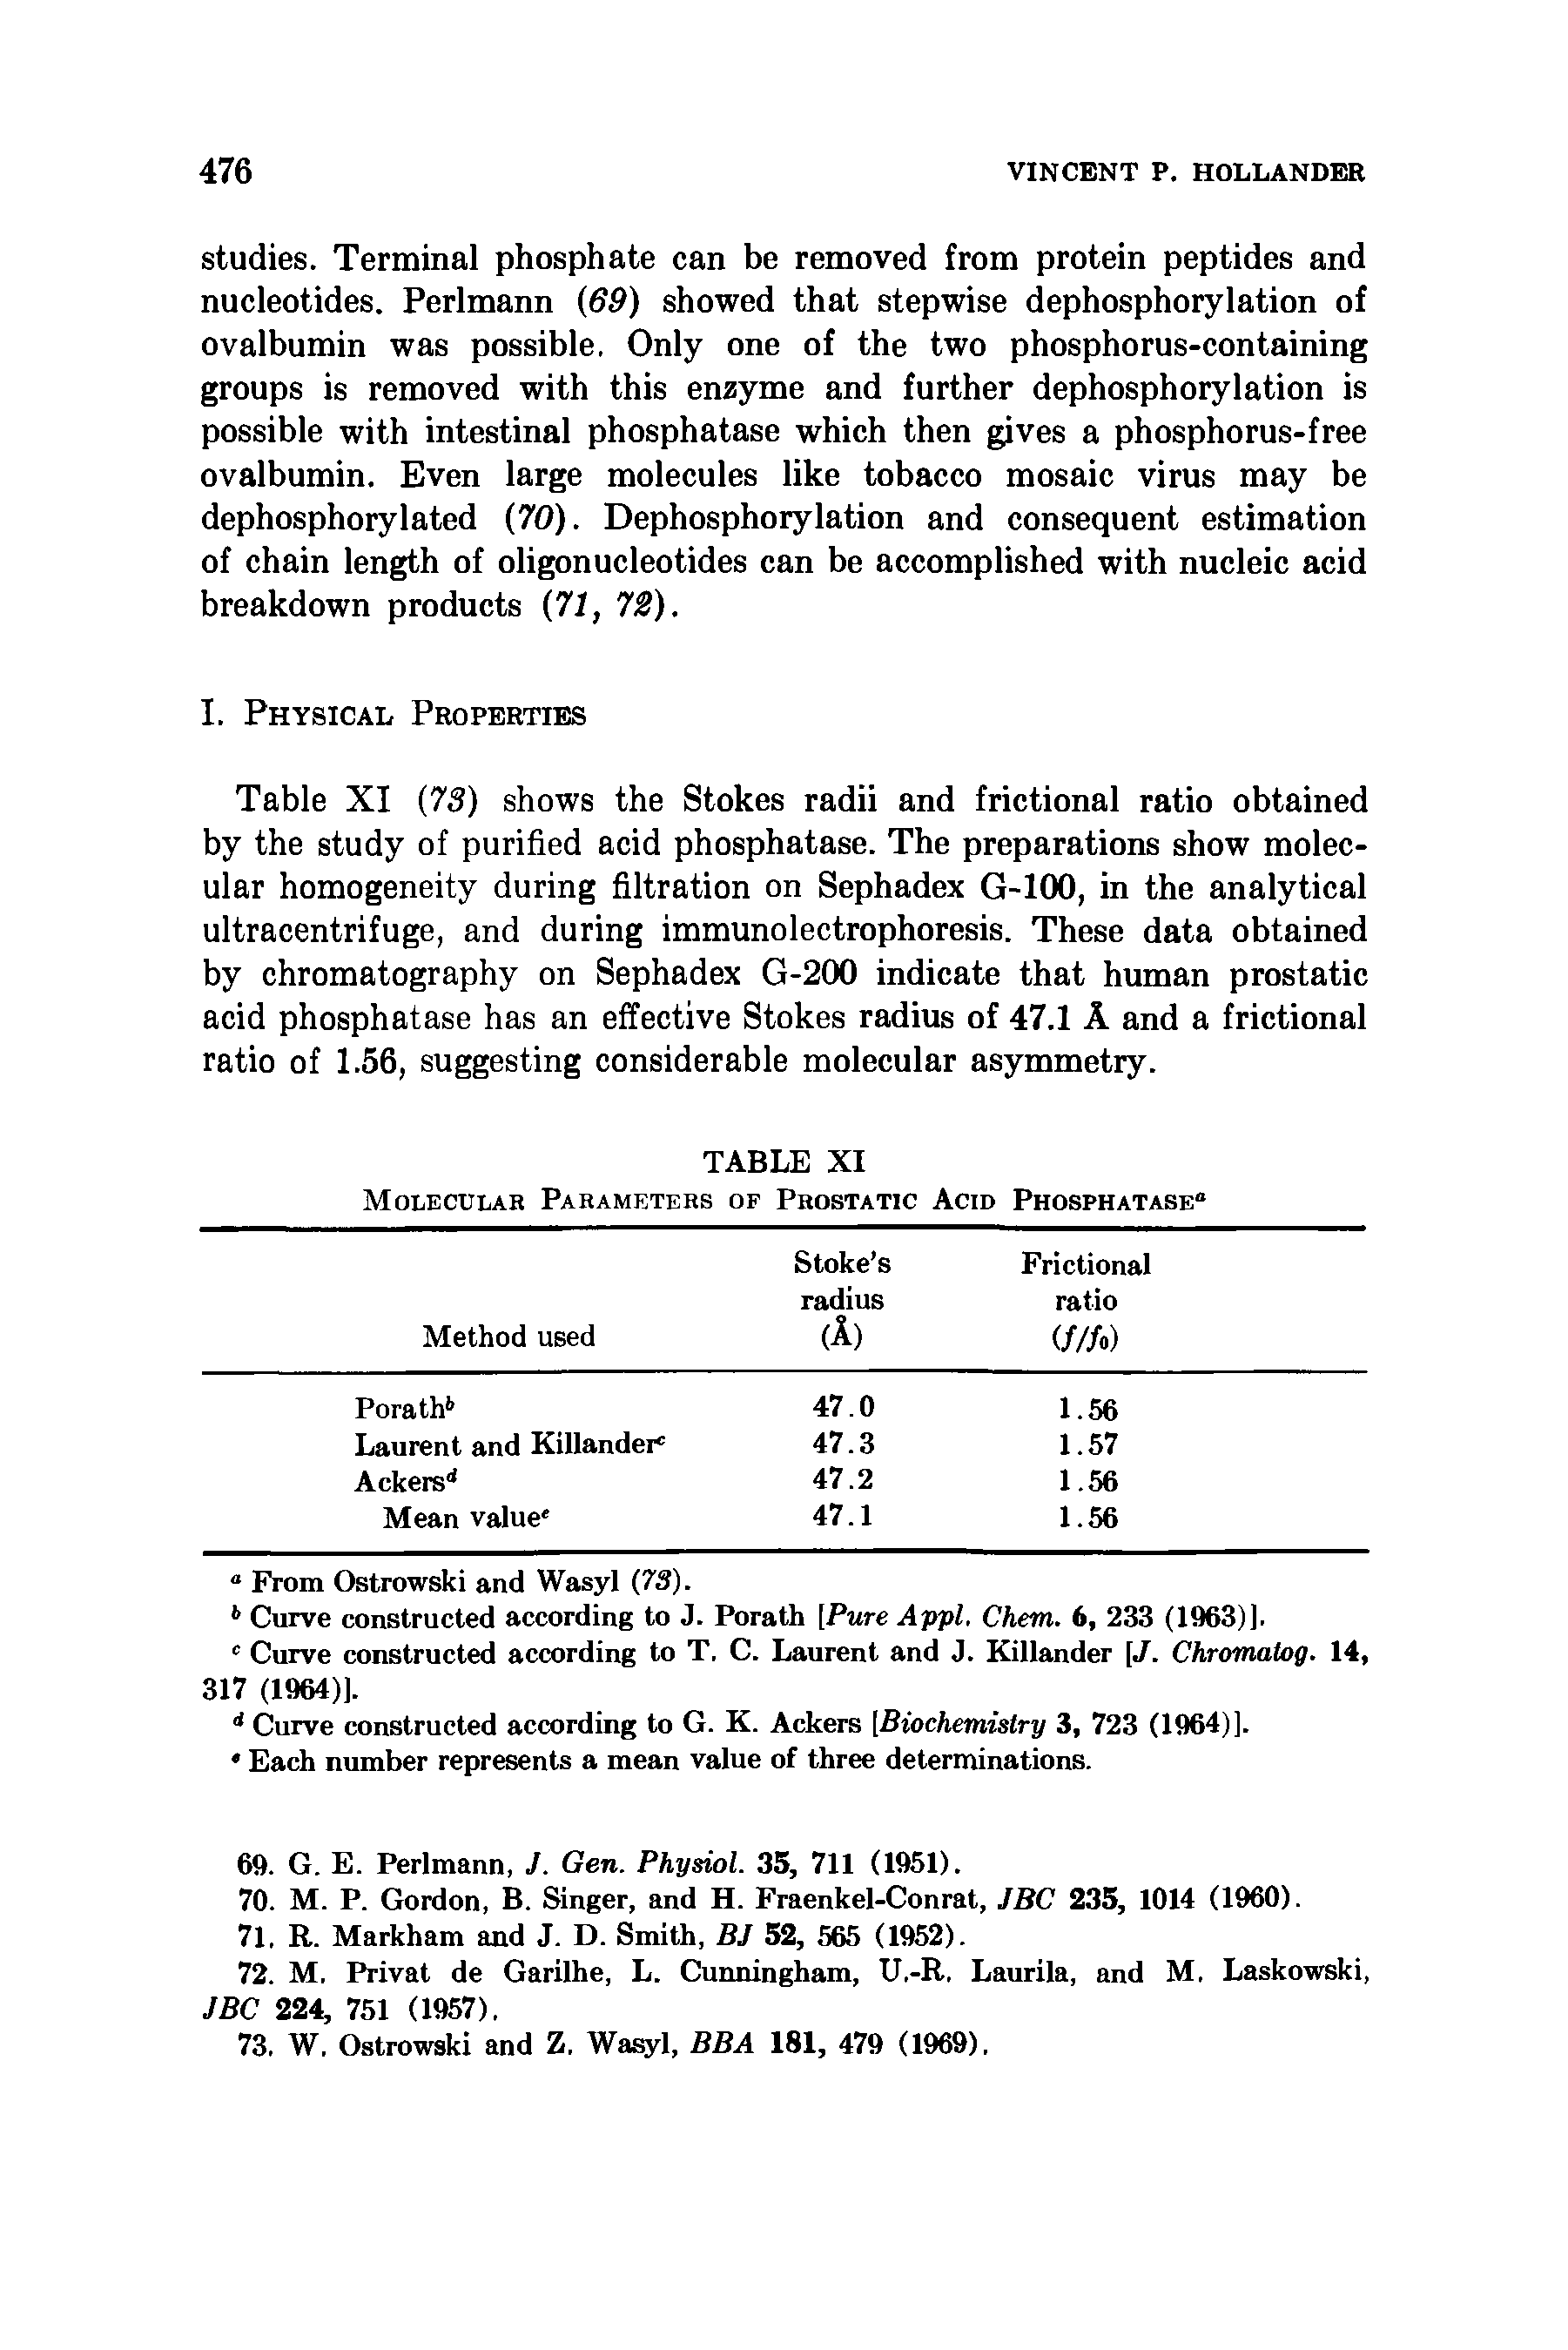 Table XI (73) shows the Stokes radii and frictional ratio obtained by the study of purified acid phosphatase. The preparations show molecular homogeneity during filtration on Sephadex G-100, in the analytical ultracentrifuge, and during immunolectrophoresis. These data obtained by chromatography on Sephadex G-200 indicate that human prostatic acid phosphatase has an effective Stokes radius of 47.1 A and a frictional ratio of 1.56, suggesting considerable molecular asymmetry.